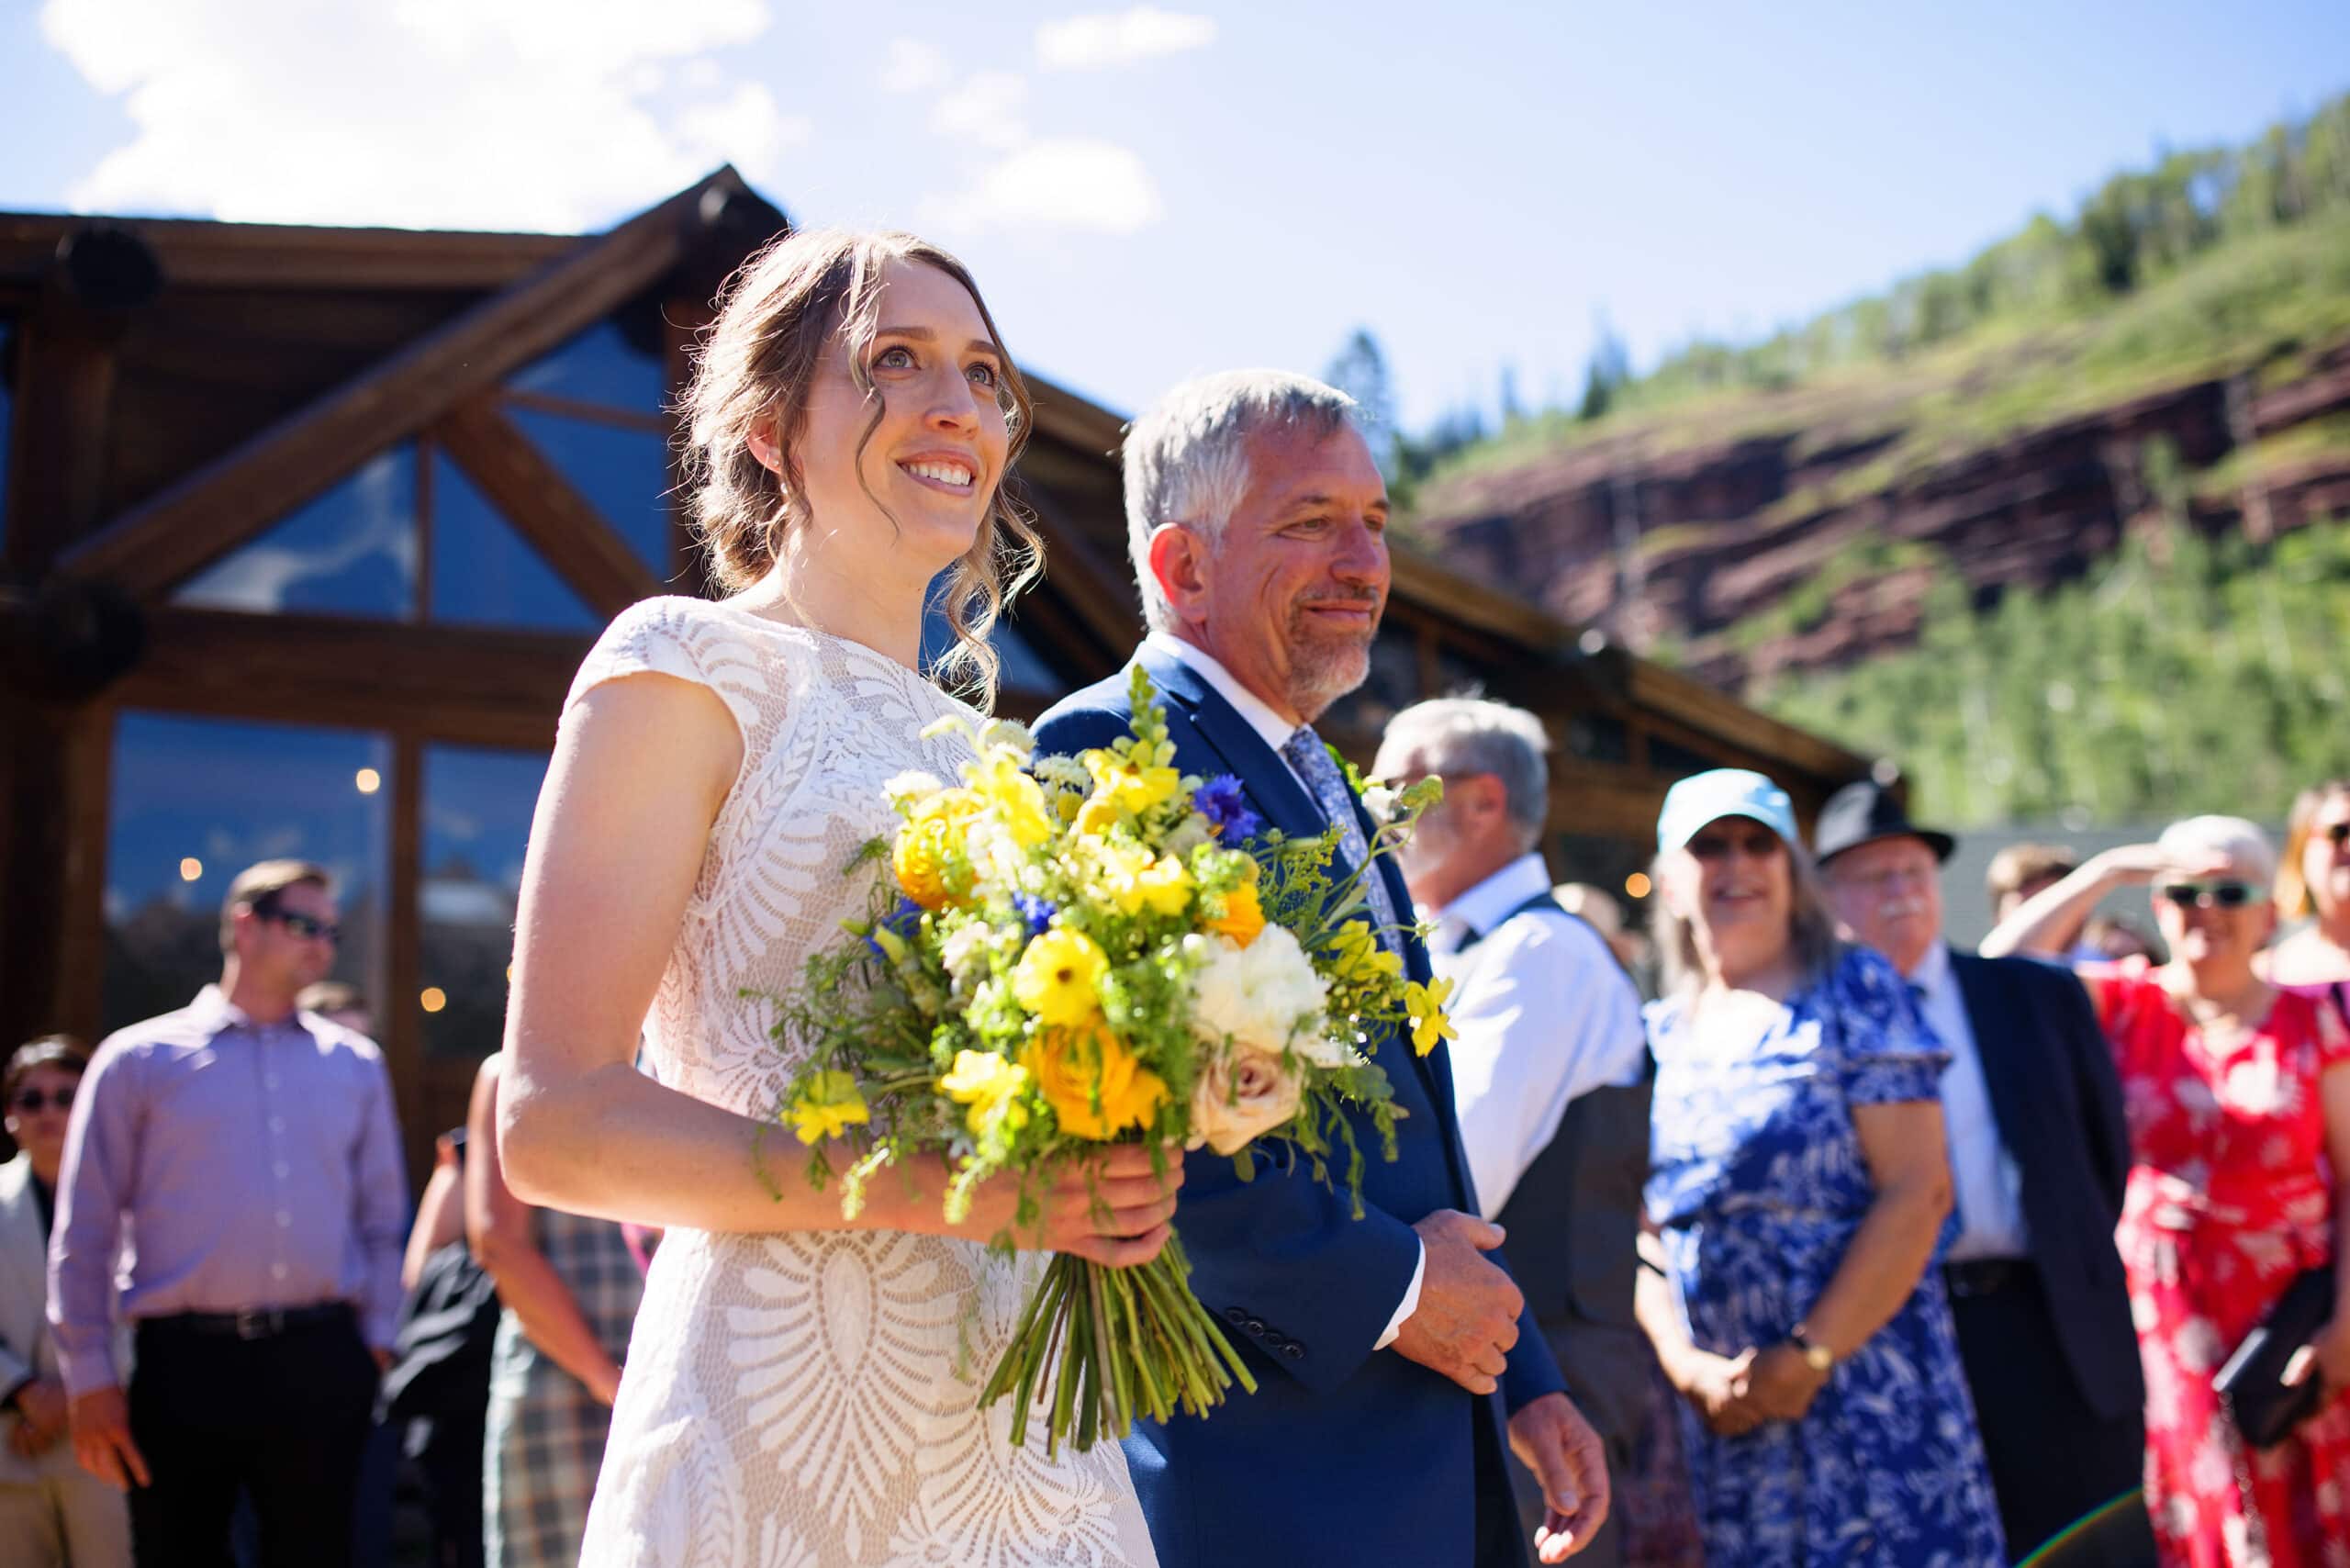 Miranda and her father walk down the aisle at Piney River Ranch